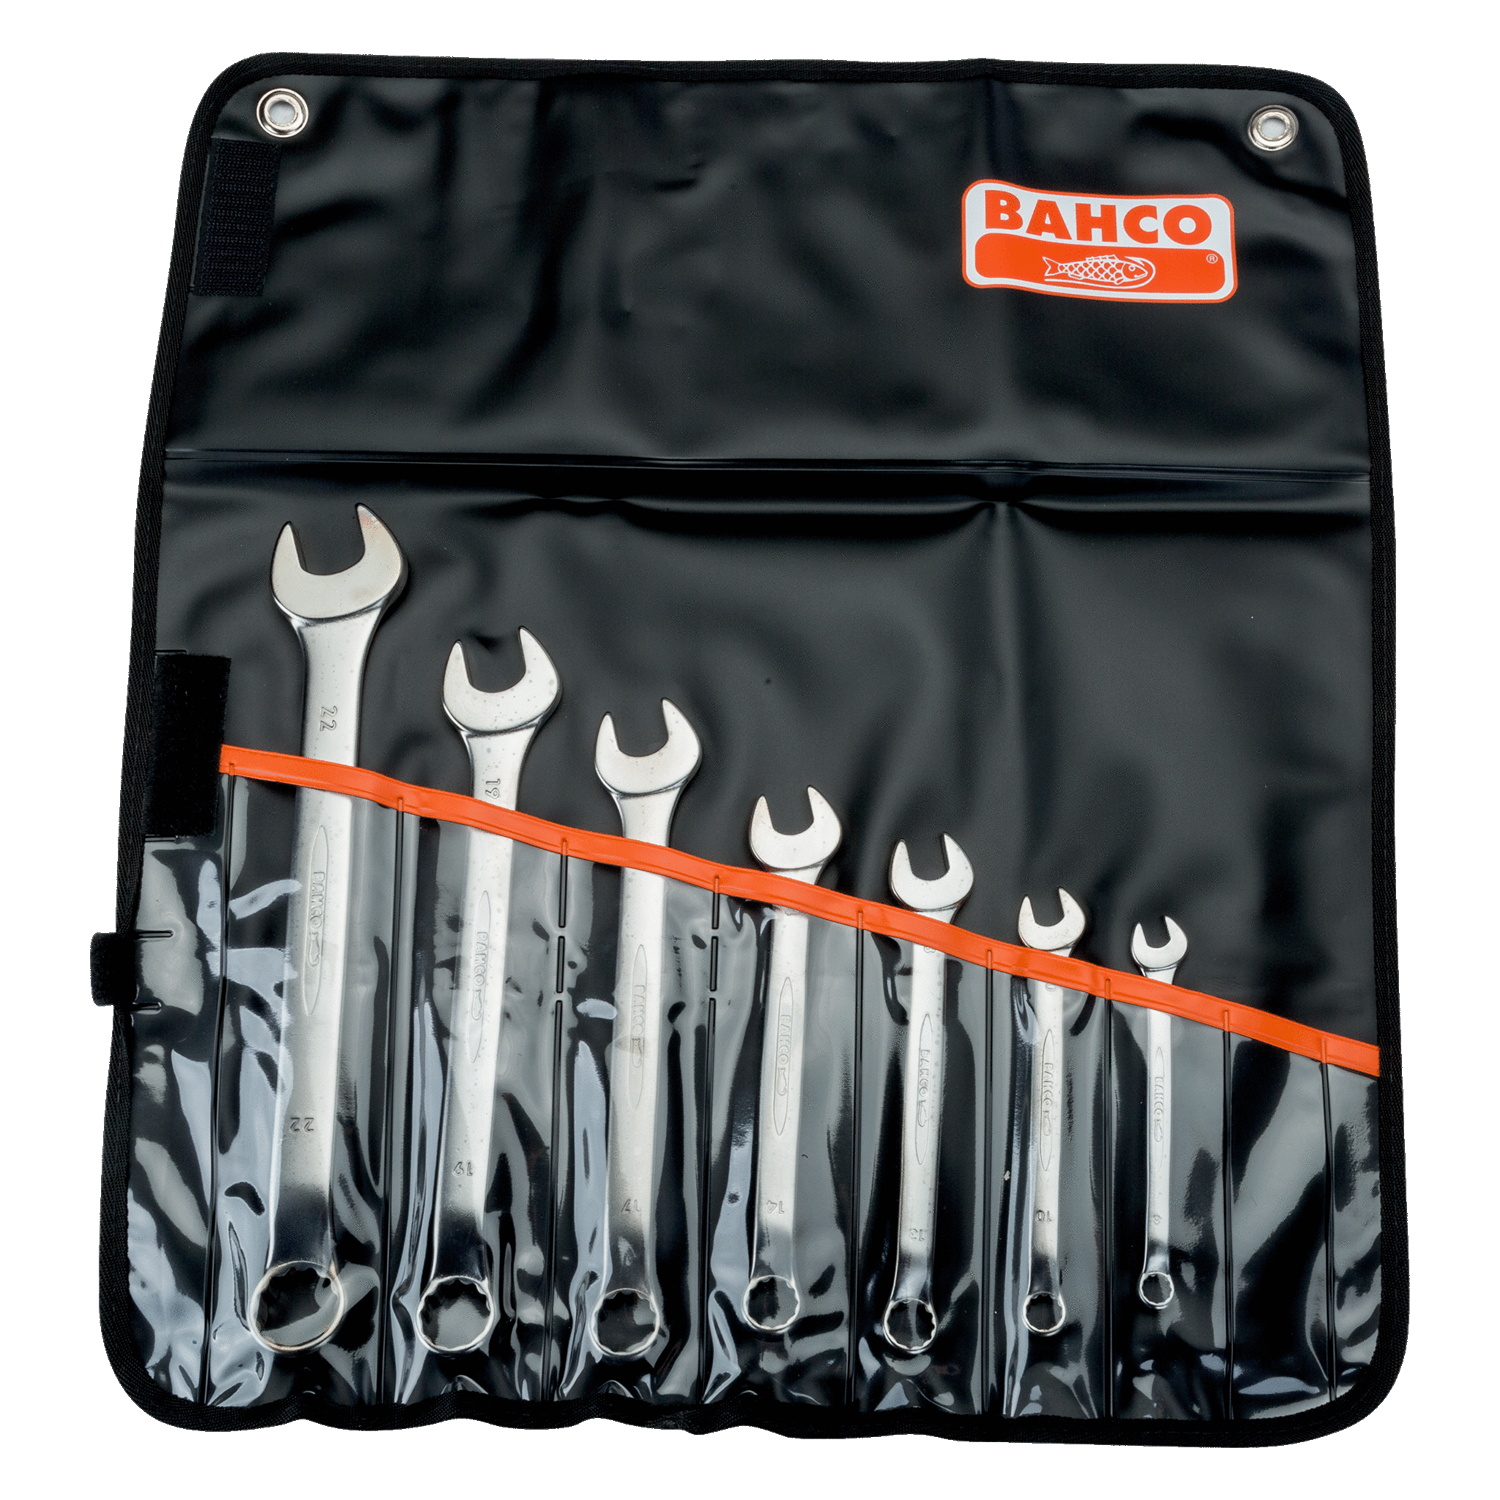 BAHCO 1952M/T Metric Offset Combination Wrench Set - 7 Pcs/Pouch - Premium Offset Combination Wrench Set from BAHCO - Shop now at Yew Aik.